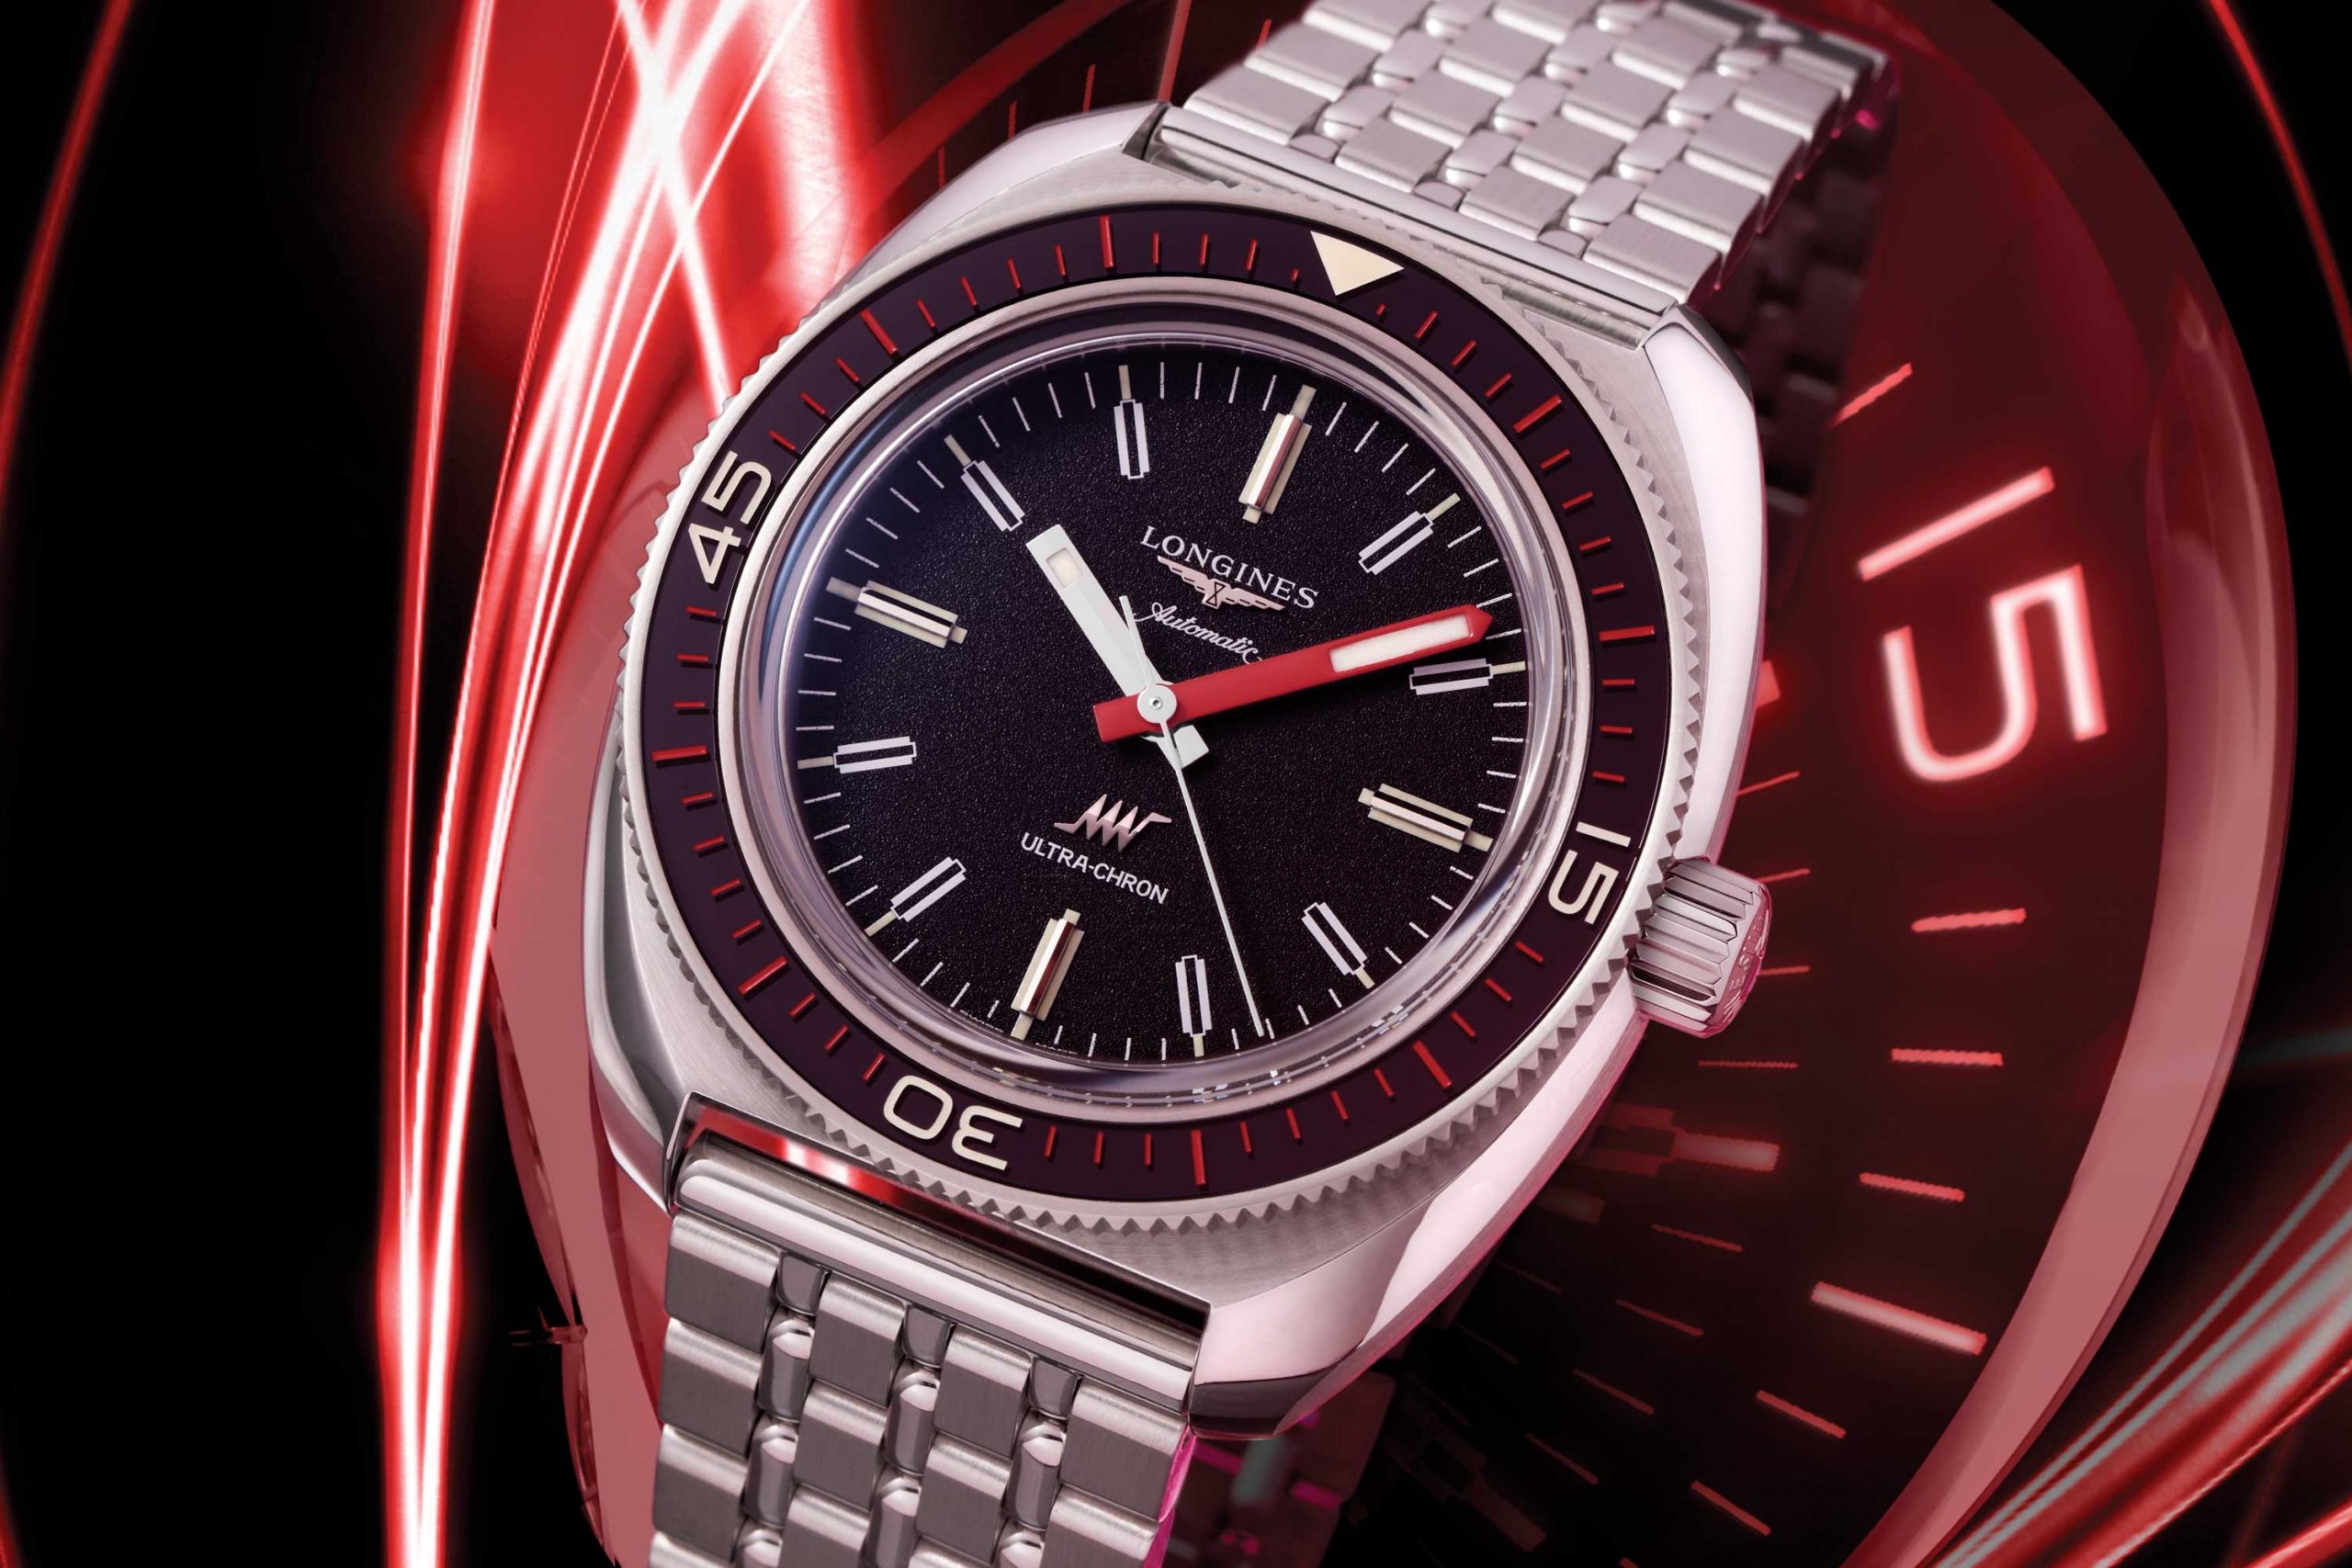 Stylistically, the 2022 Longines Ultra-Chron draws inspiration from the historical Ultra-Chron high-beat Diver of 1968